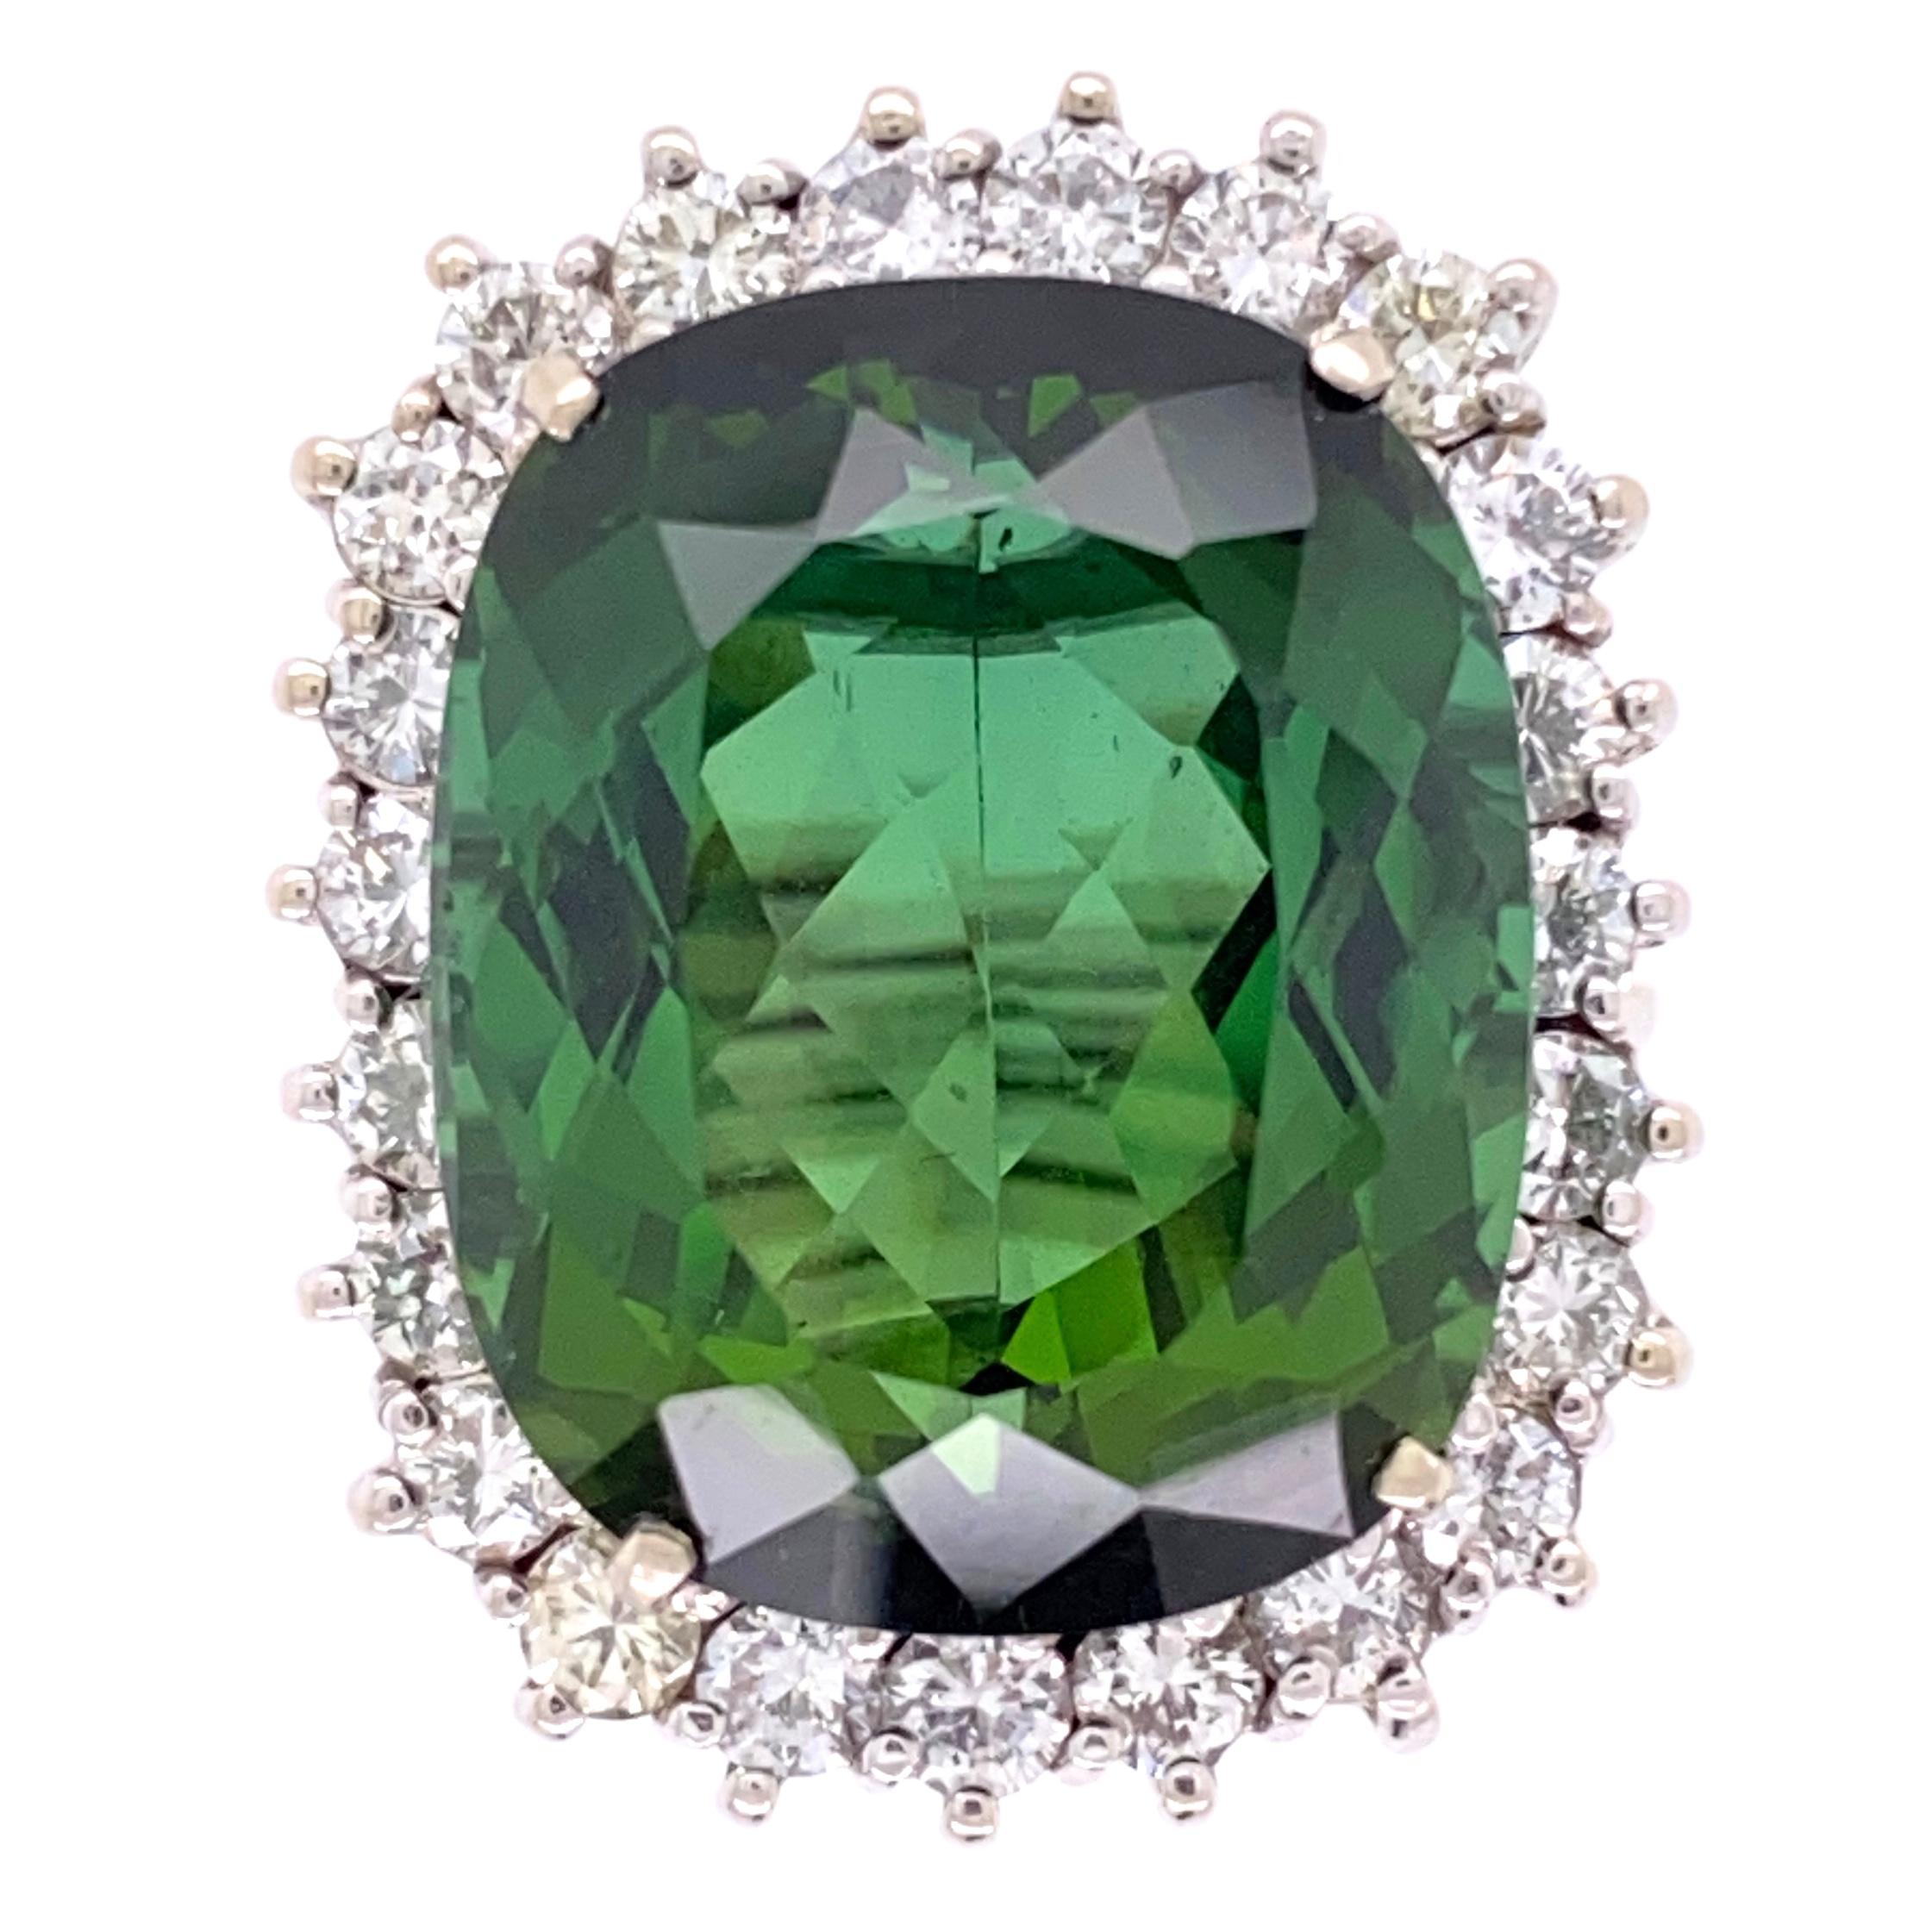 Simply Beautiful! Finely detailed Mid Century Modern Green Tourmaline and Diamond Cocktail Solitaire Ring. Centering a Hand set securely nestled 18.63 Carat Green Tourmaline, surrounded by Diamonds, approx. 1.70tcw. Hand crafted in 18K White Gold.